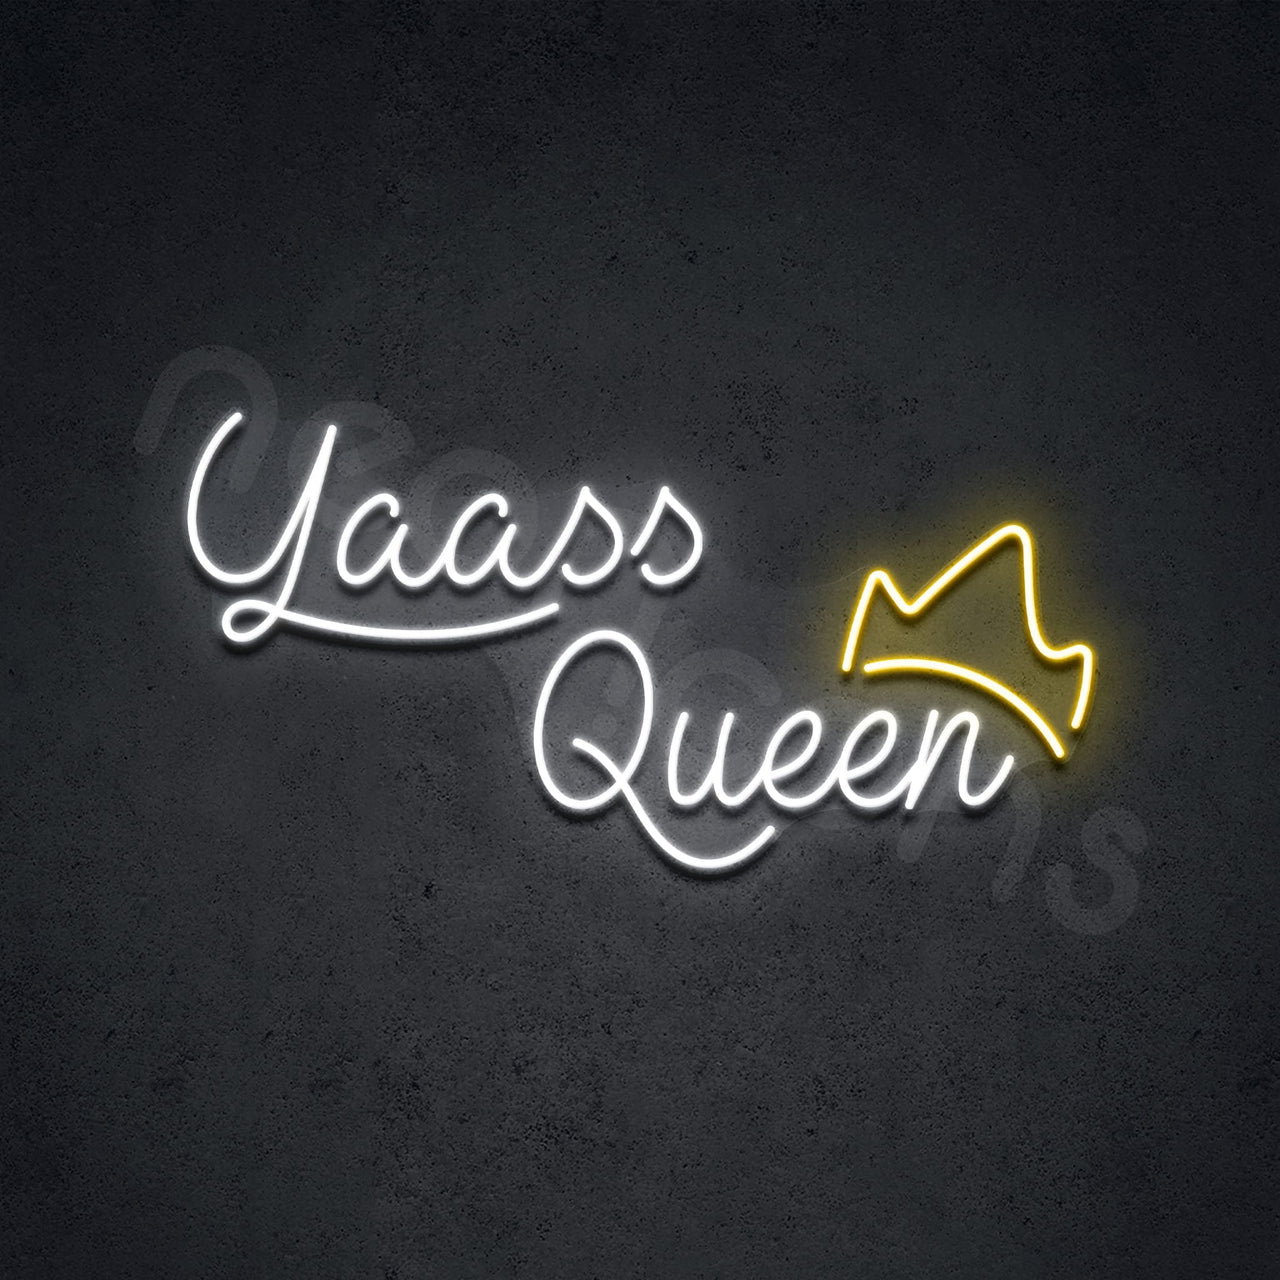 "Yaass Queen" Neon Sign by Neon Icons